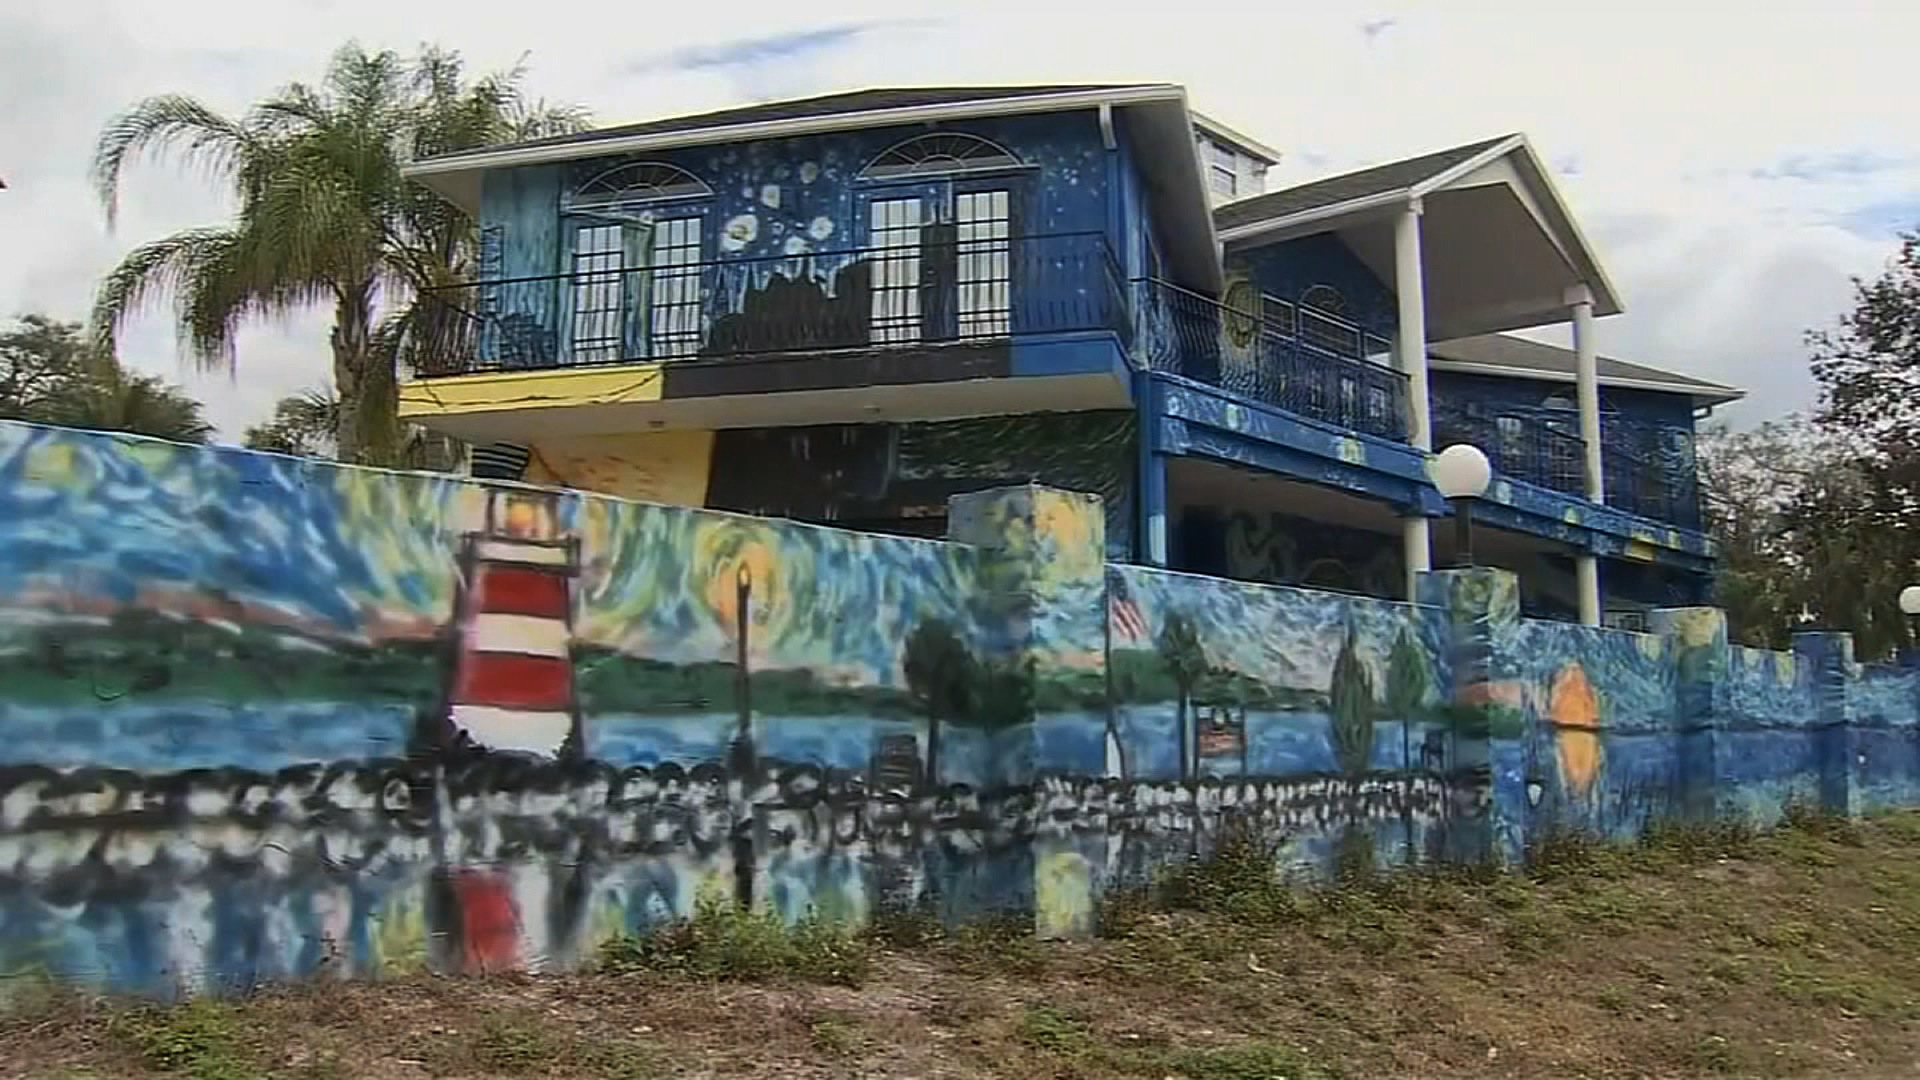 Florida House Is Painted Like A Van Gogh But City Of Mount Dora Is Not A Fan Cnn